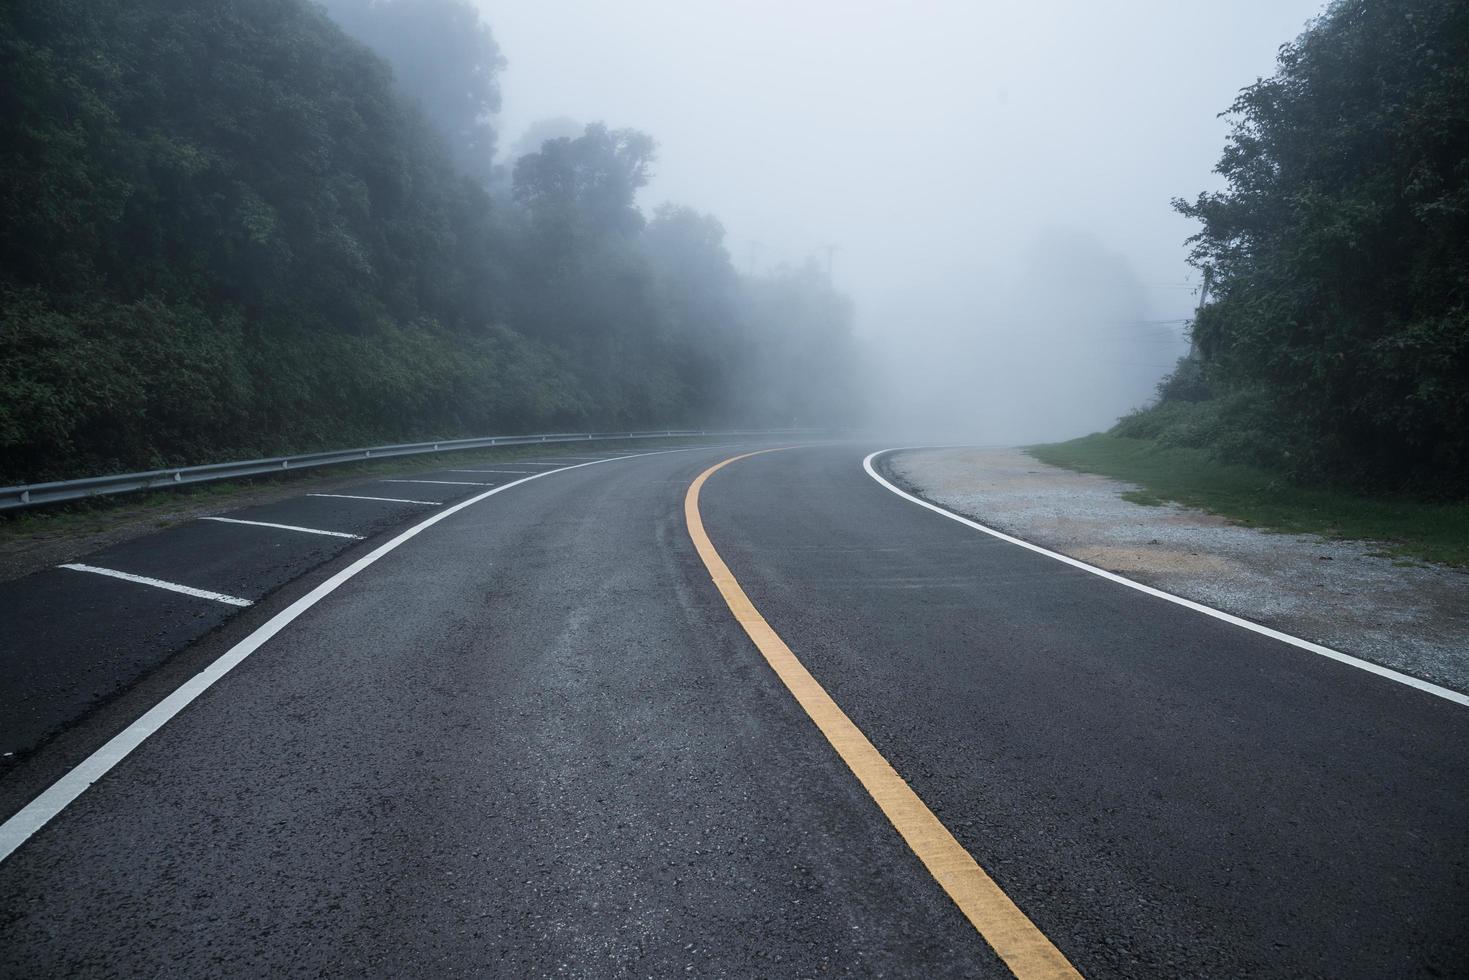 The long road through the mist on the mountains. photo